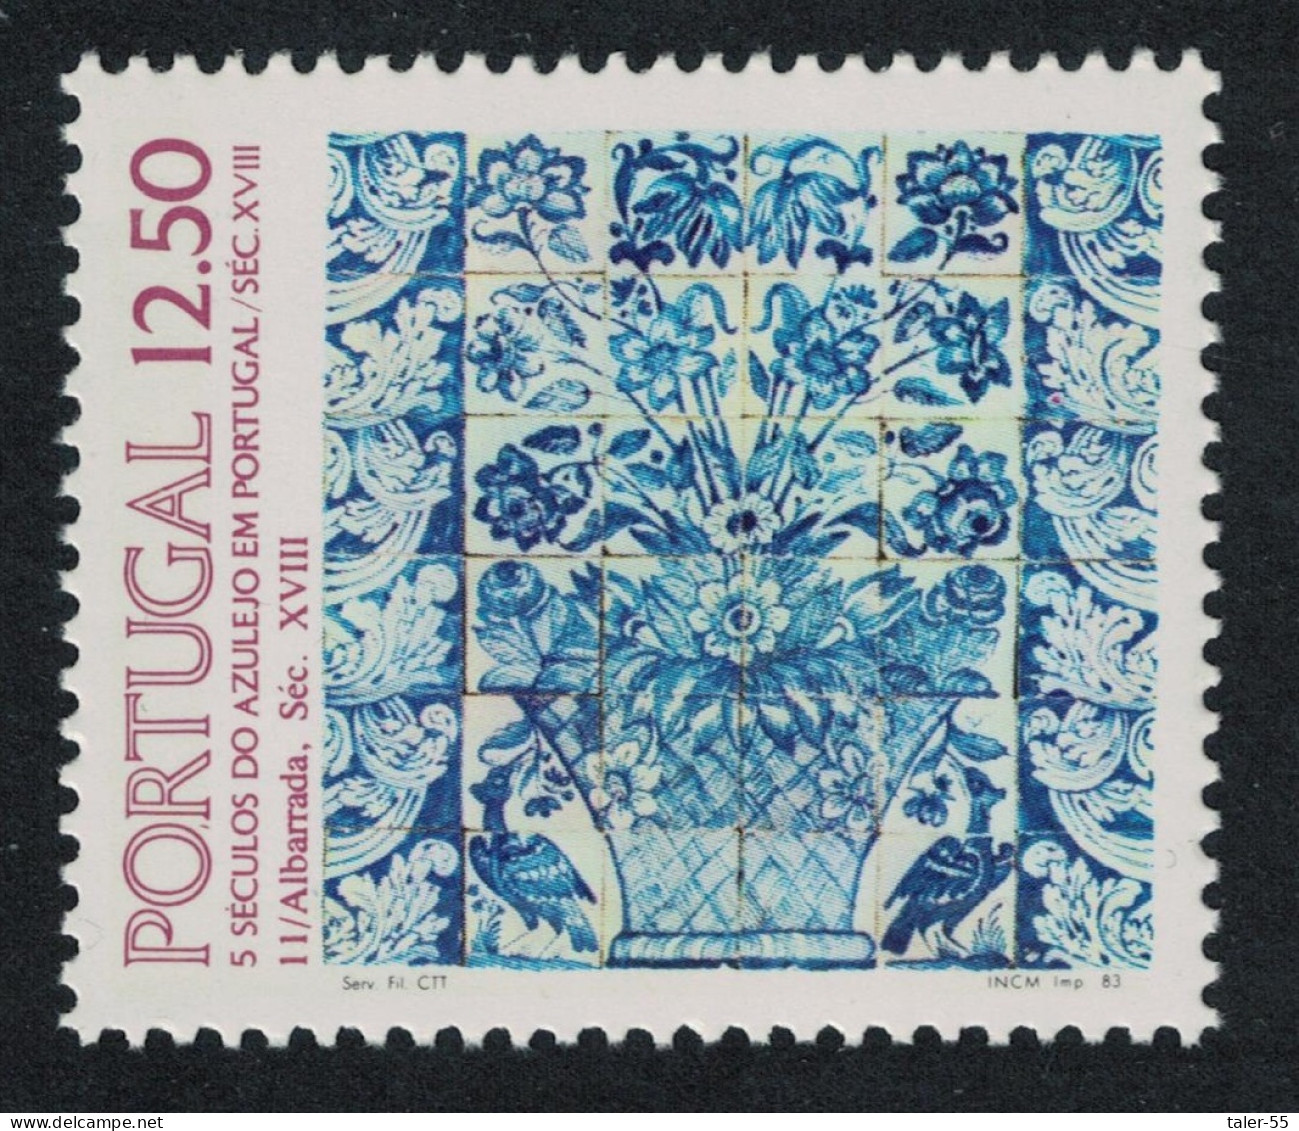 Portugal Tiles 11th Series 1983 MNH SG#1935 - Unused Stamps